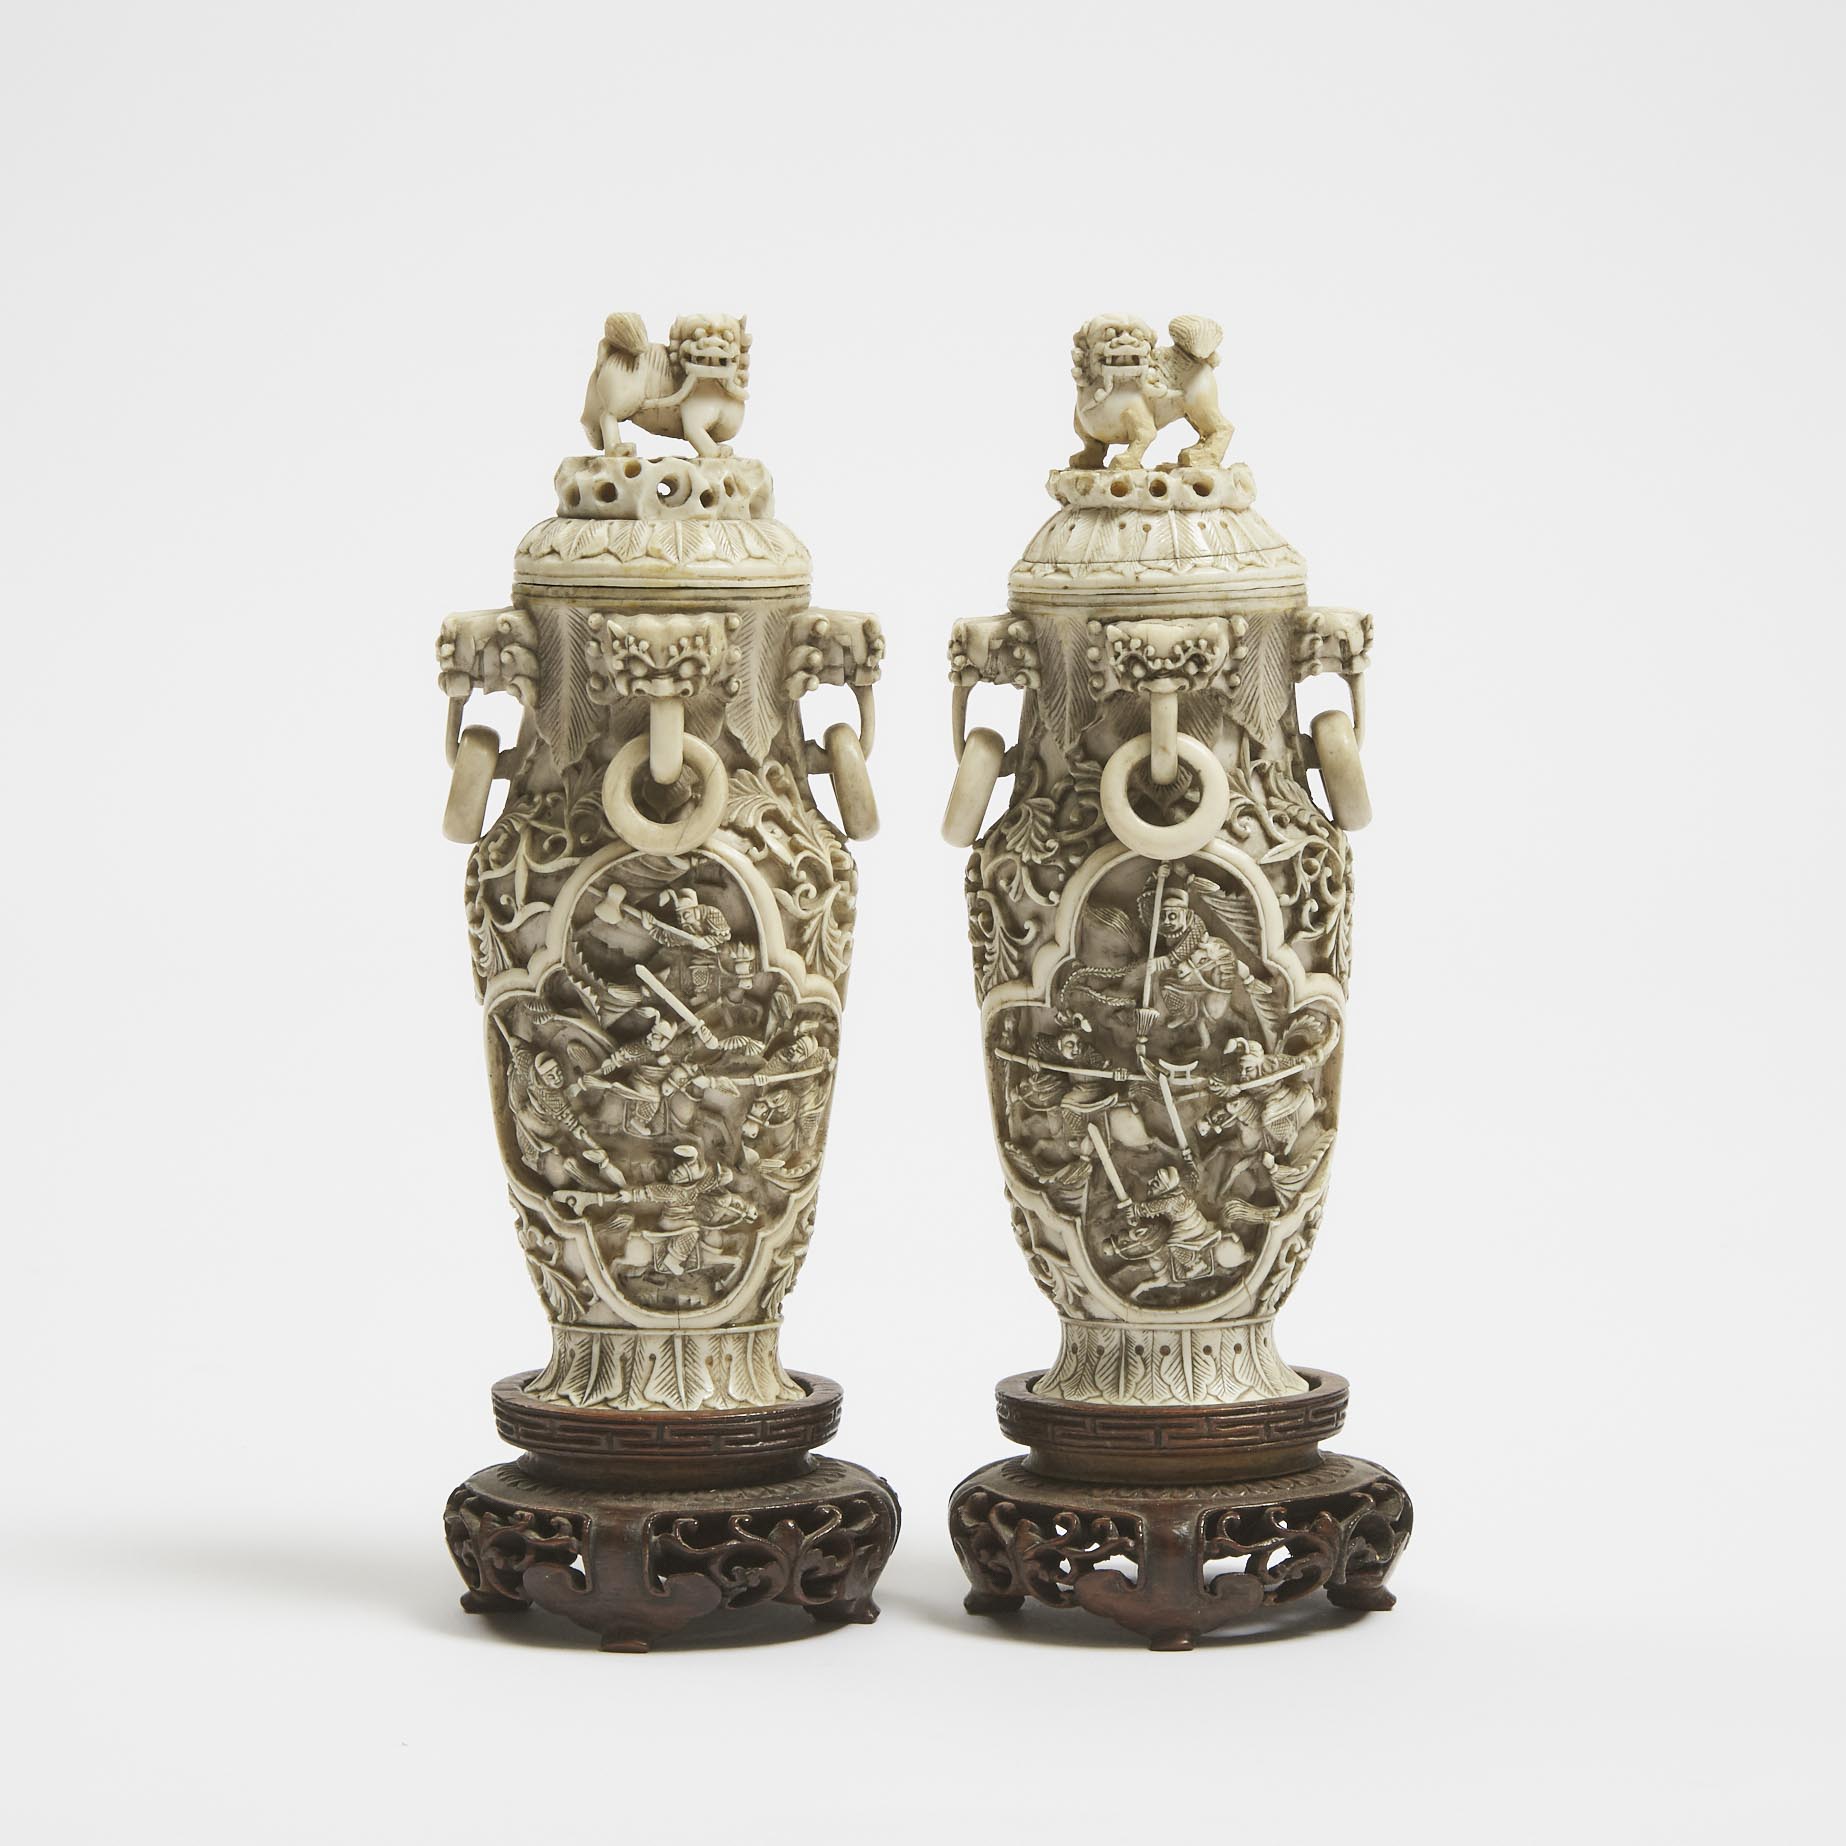 A Pair of Chinese Carved Ivory Vases and Covers, Circa 1900